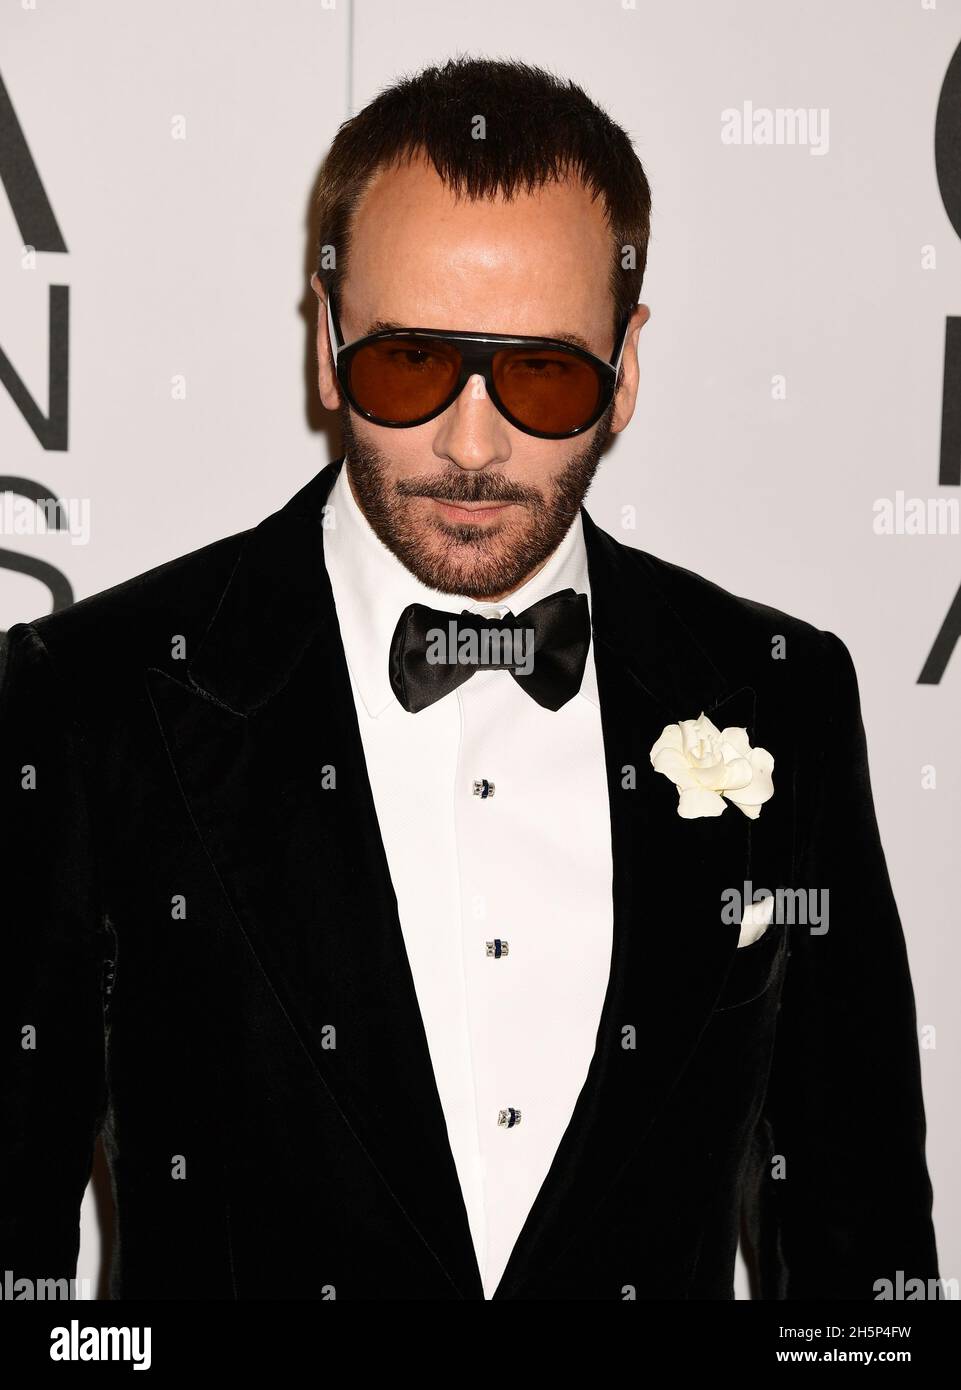 Tom Ford arriving for the 2021 CFDA Fashion Awards Credit: Jennifer Graylock/Alamy Live News Stock Photo